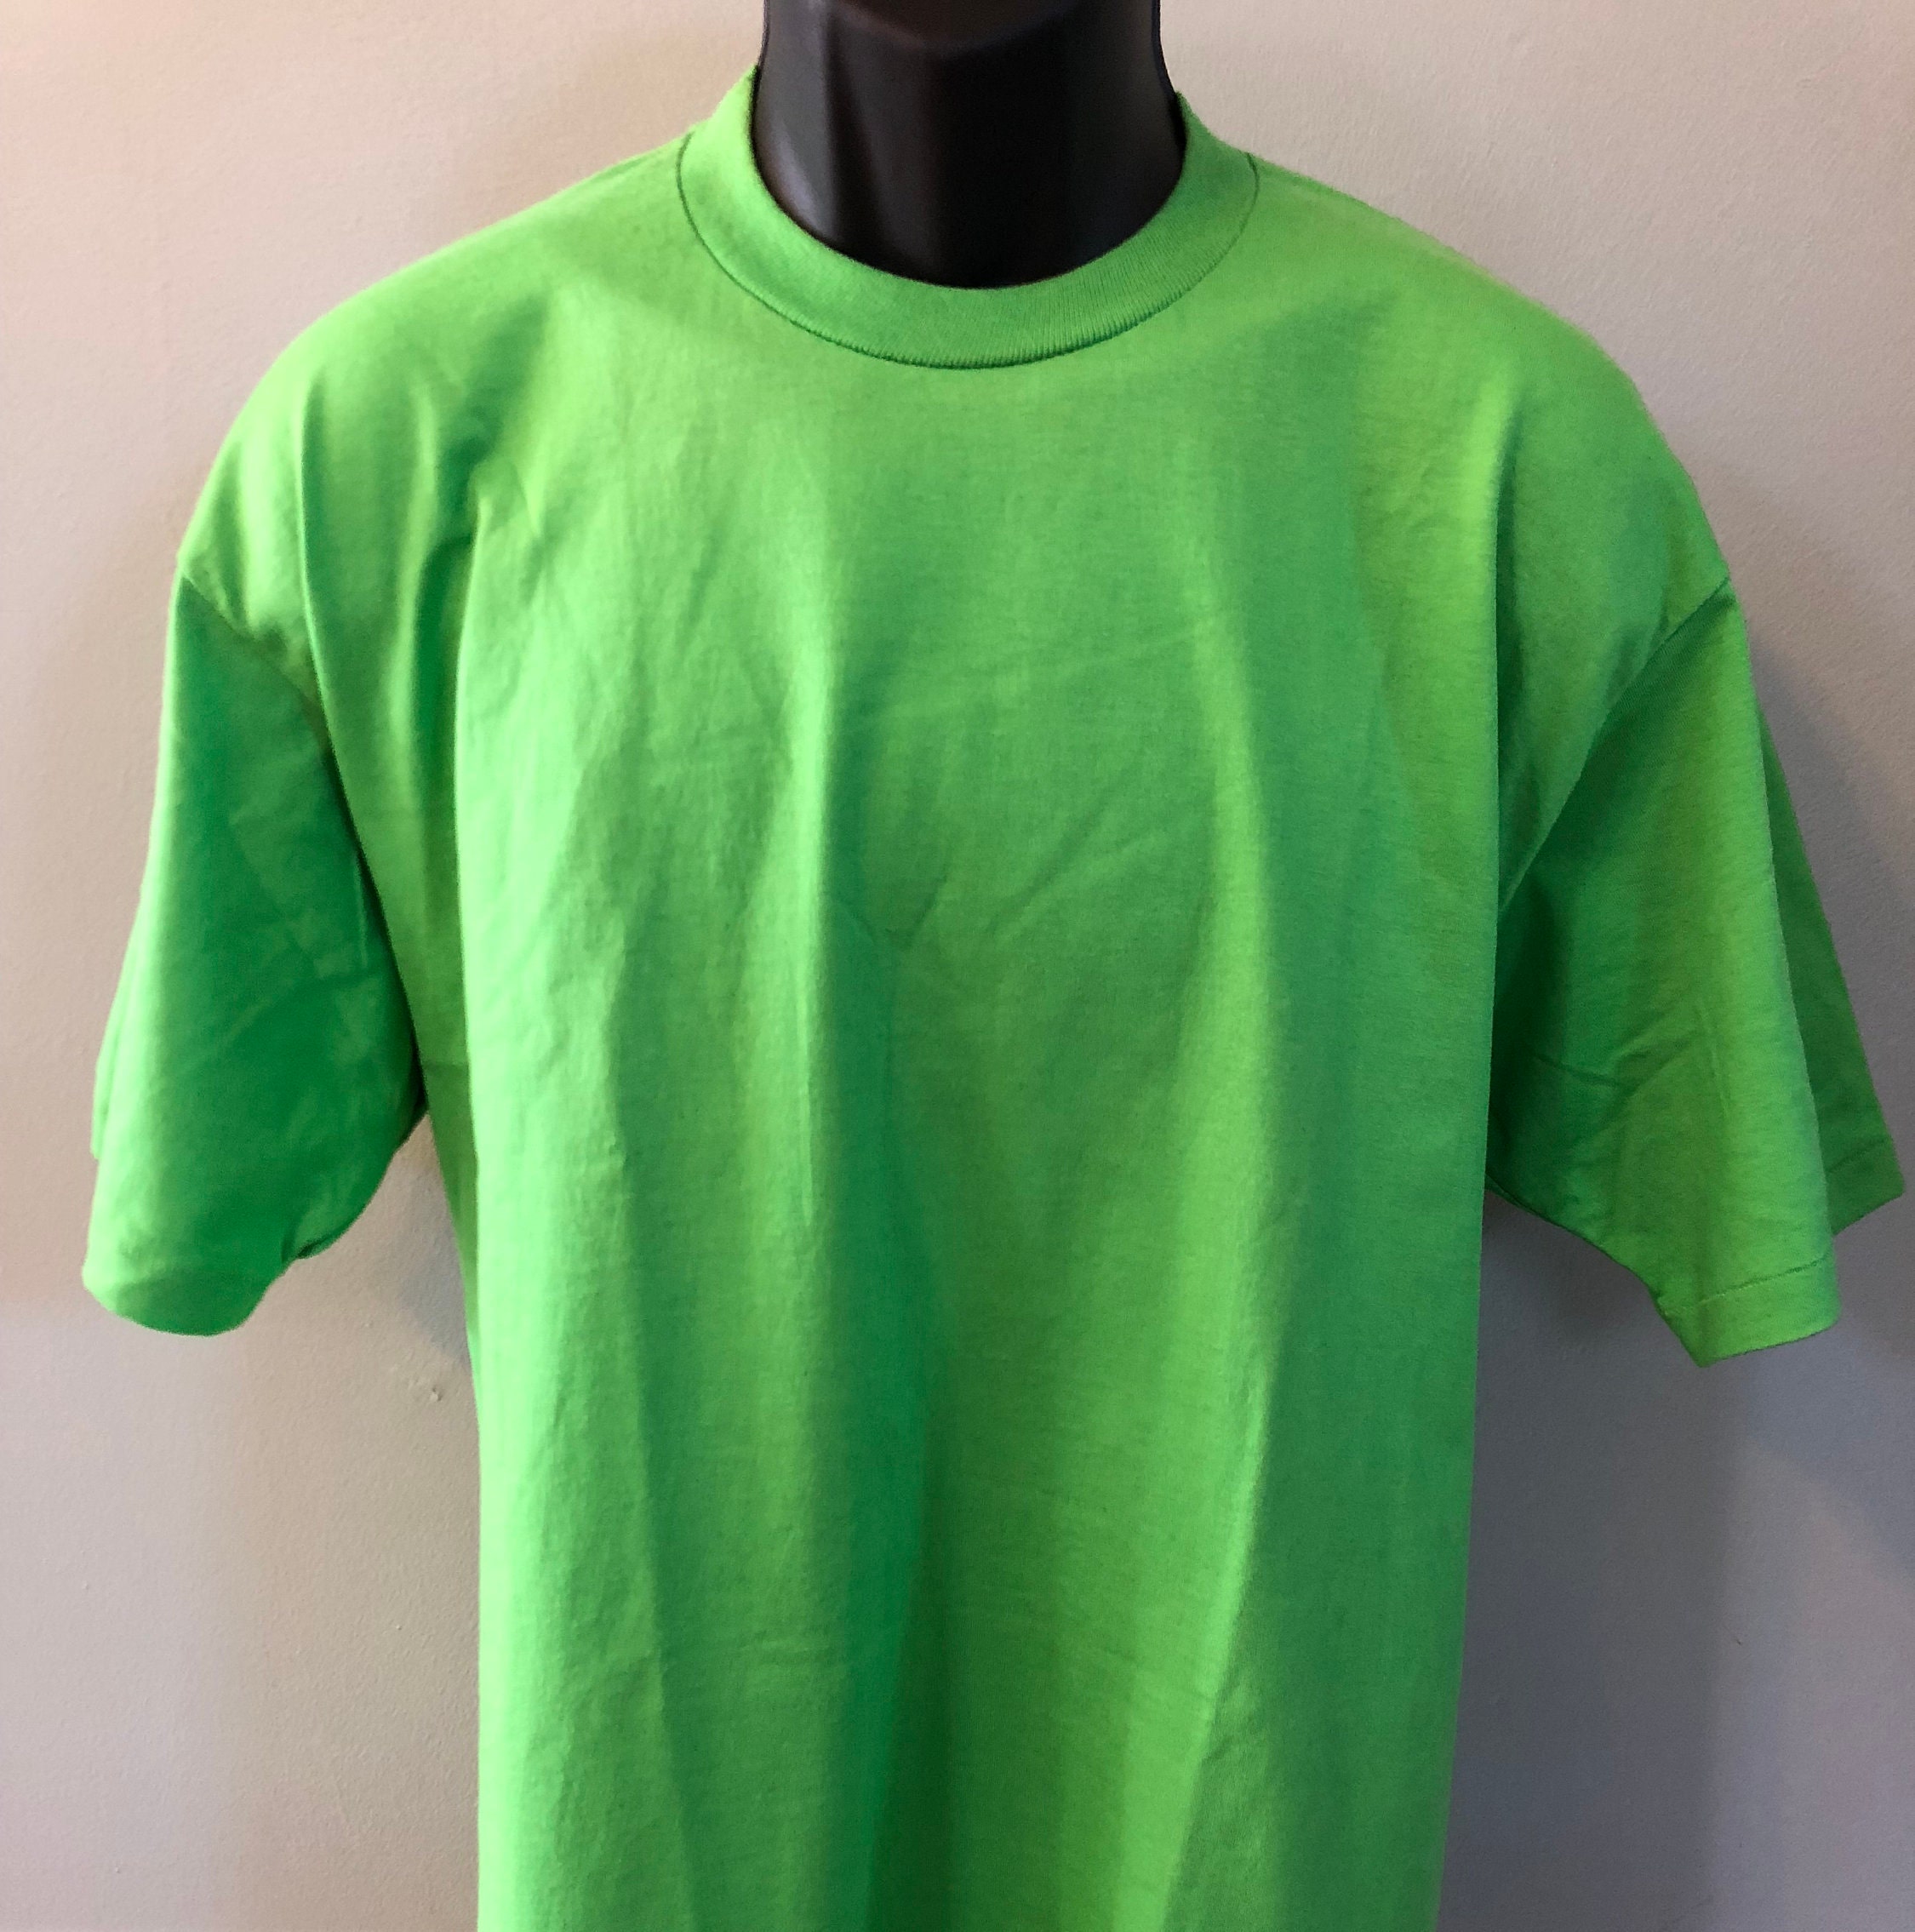 80s Jerzees Neon Green Shirt Vintage Tee Crewneck Russell | Etsy